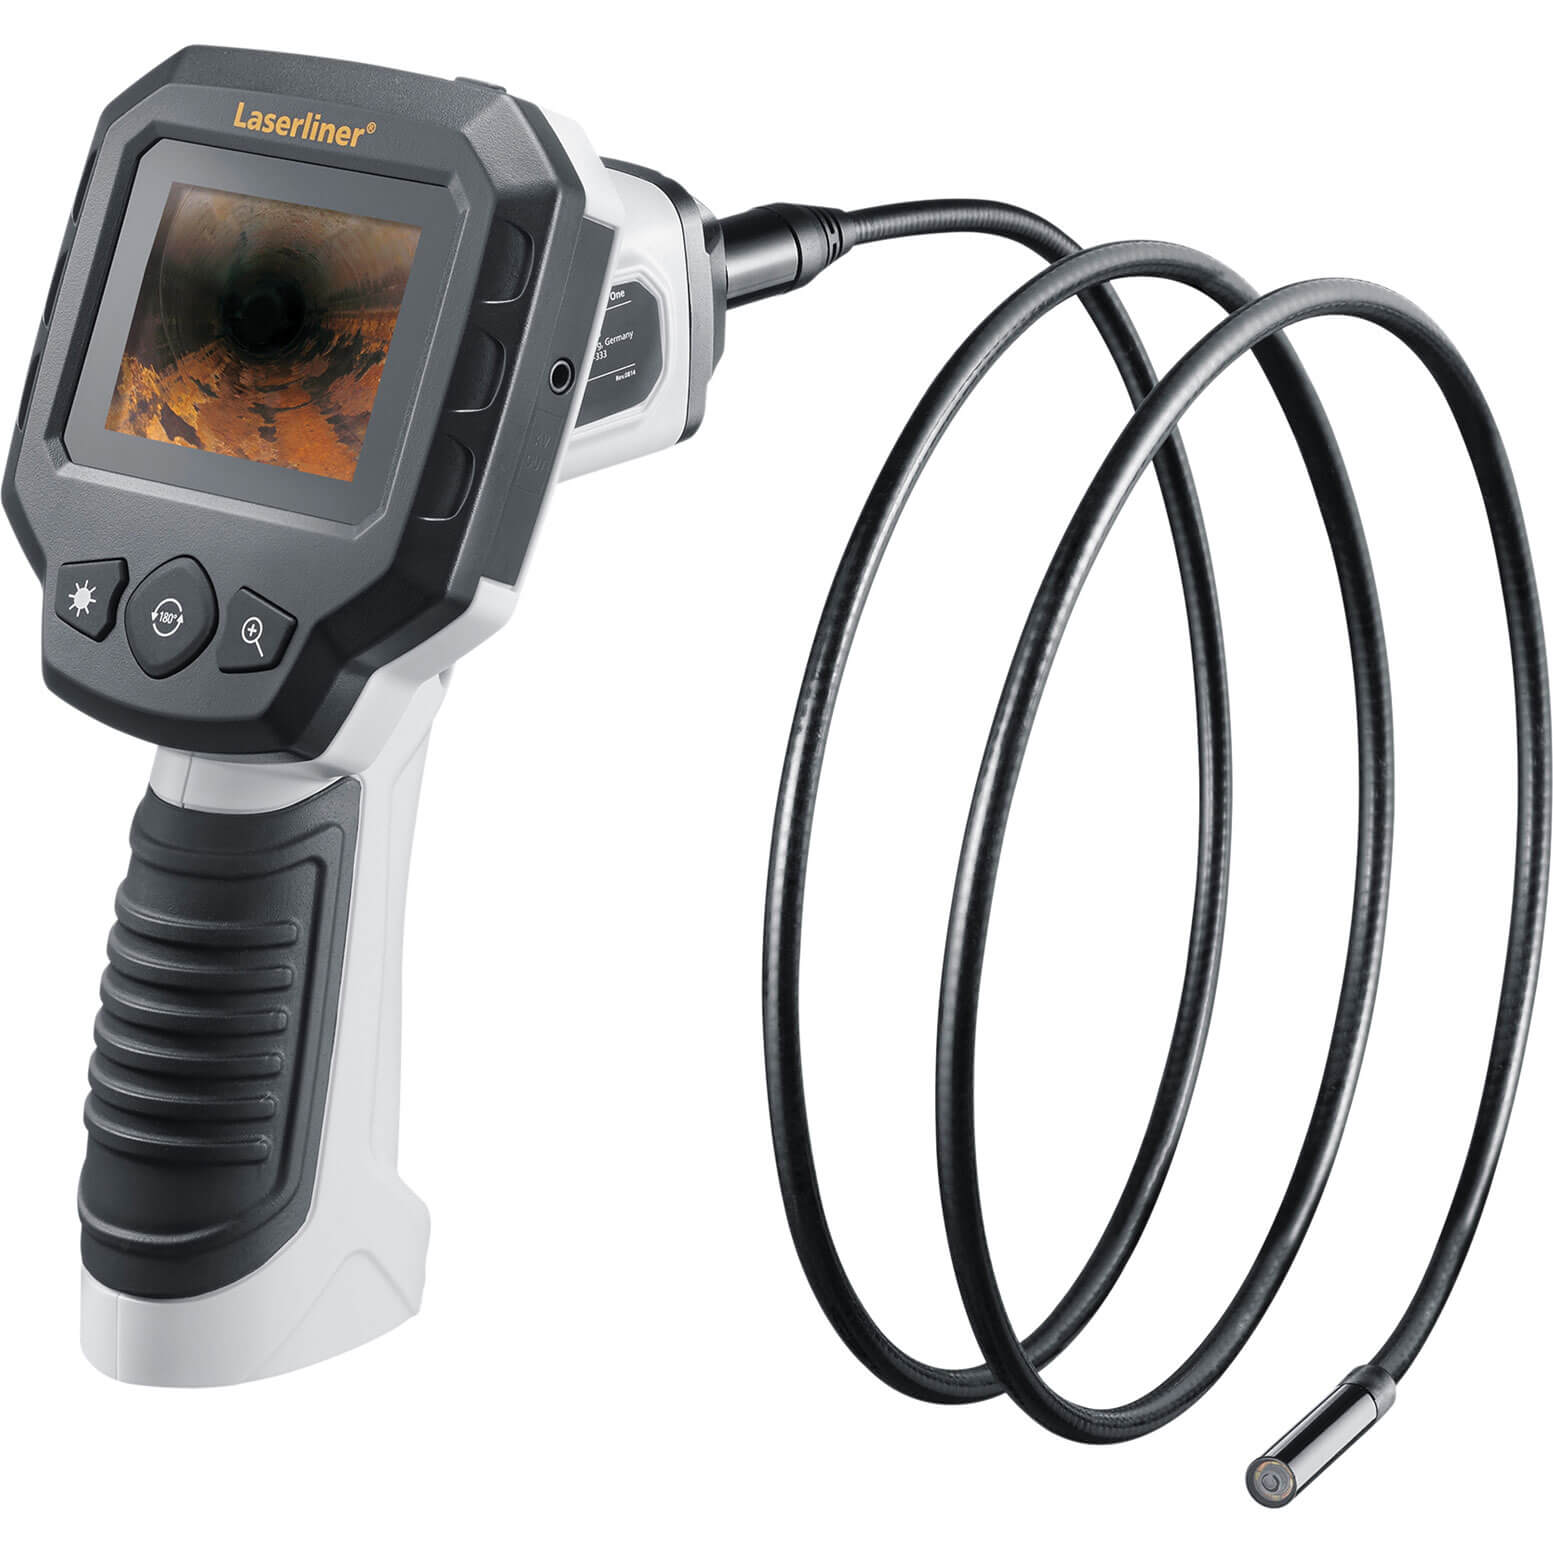 Image of LaserLiner Videoscope One Compact Inspection Camera 1.5 Mete Long